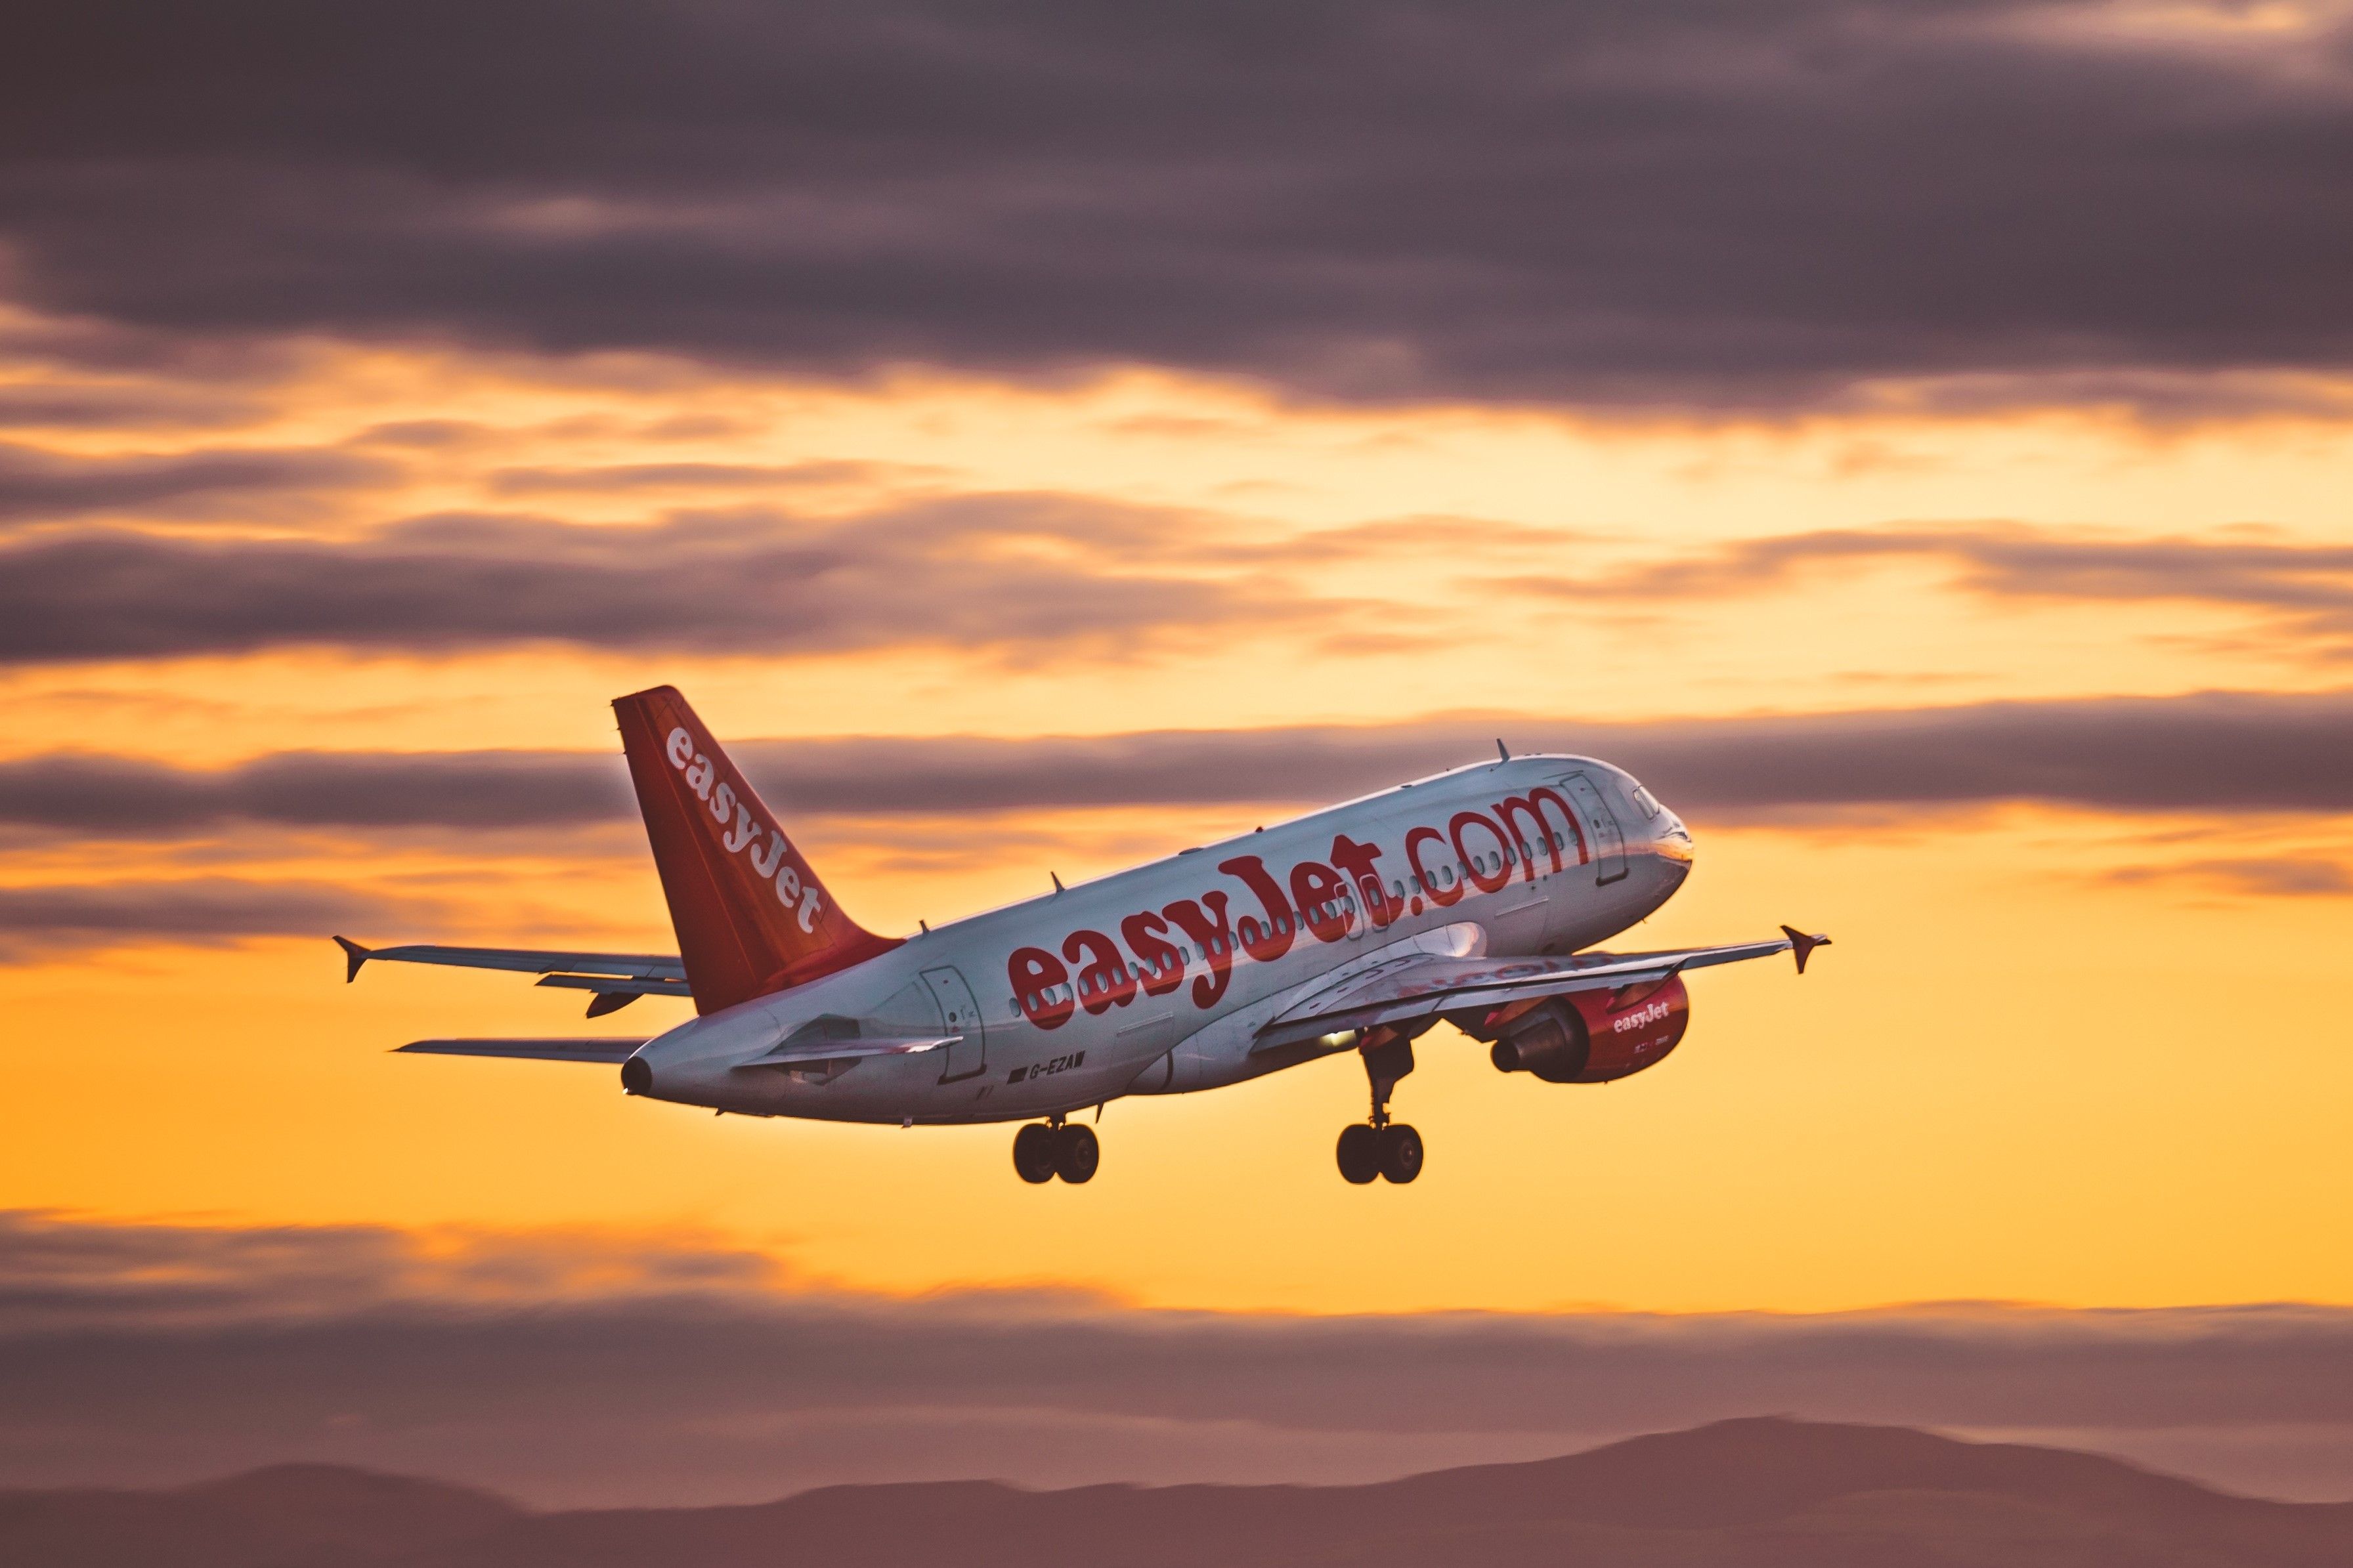 EasyJet Airbus A320 departing Liverpool John Lennon Airport at sunset